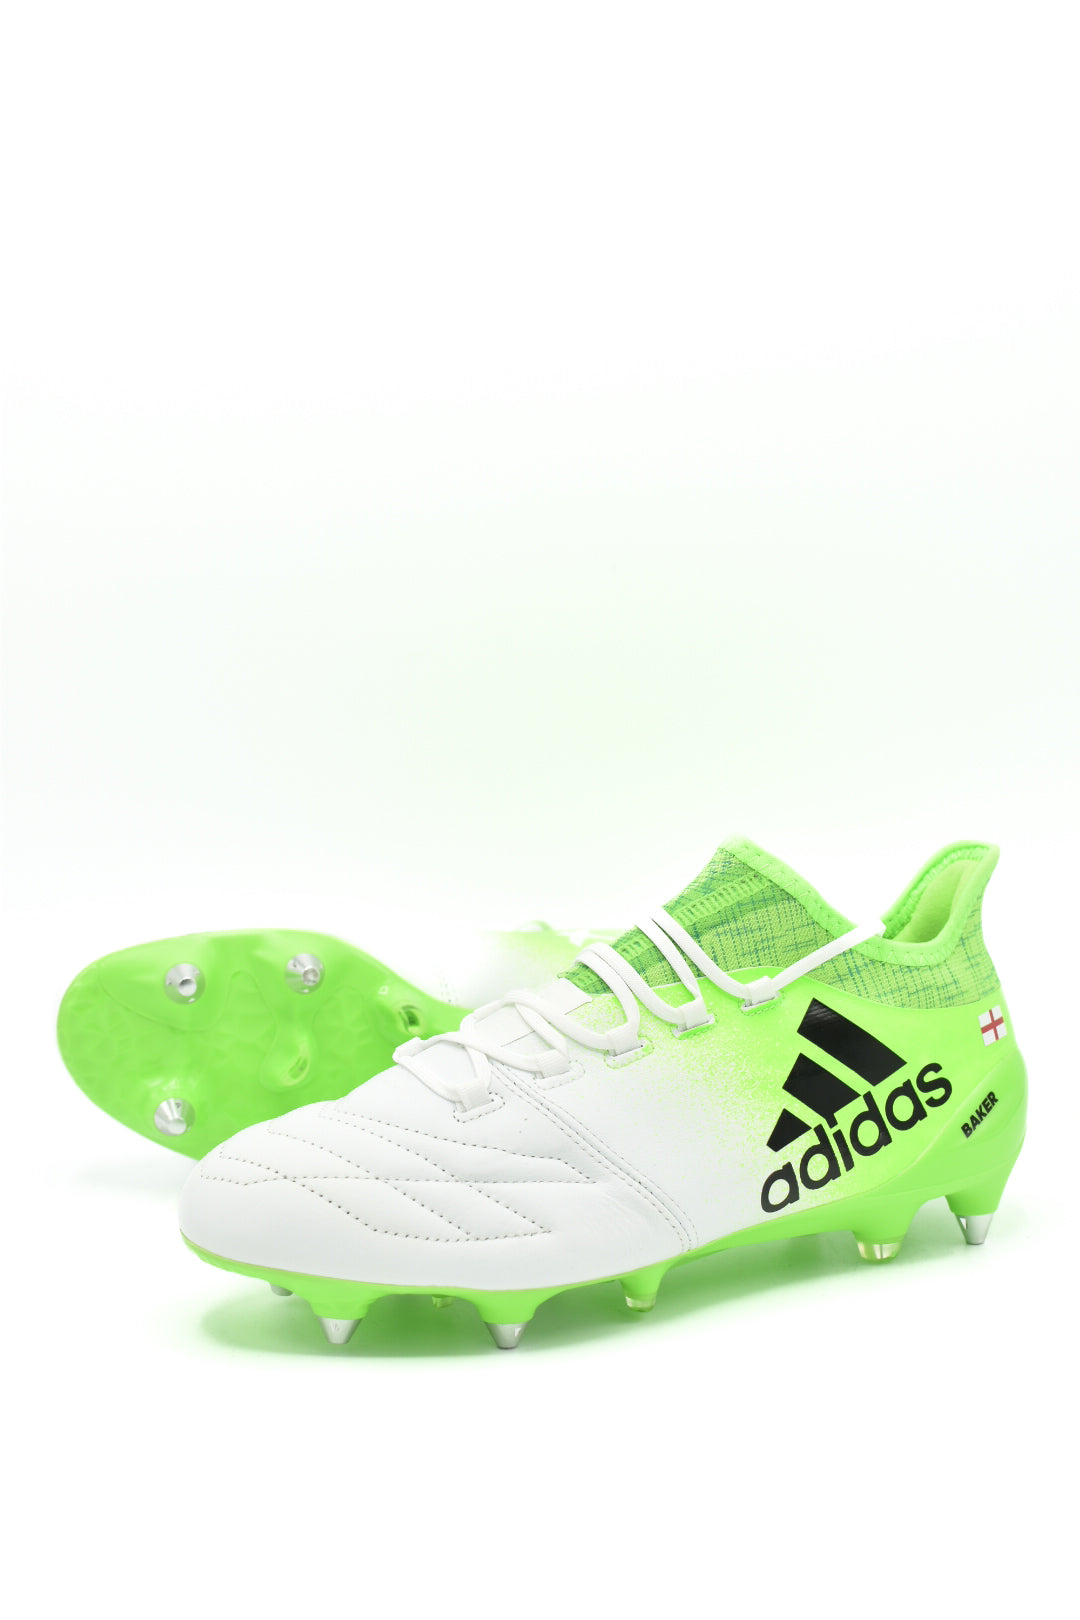 X 16.1 LEATHER SG 'PLAYER ISSUED' – Dutch Boot Collector